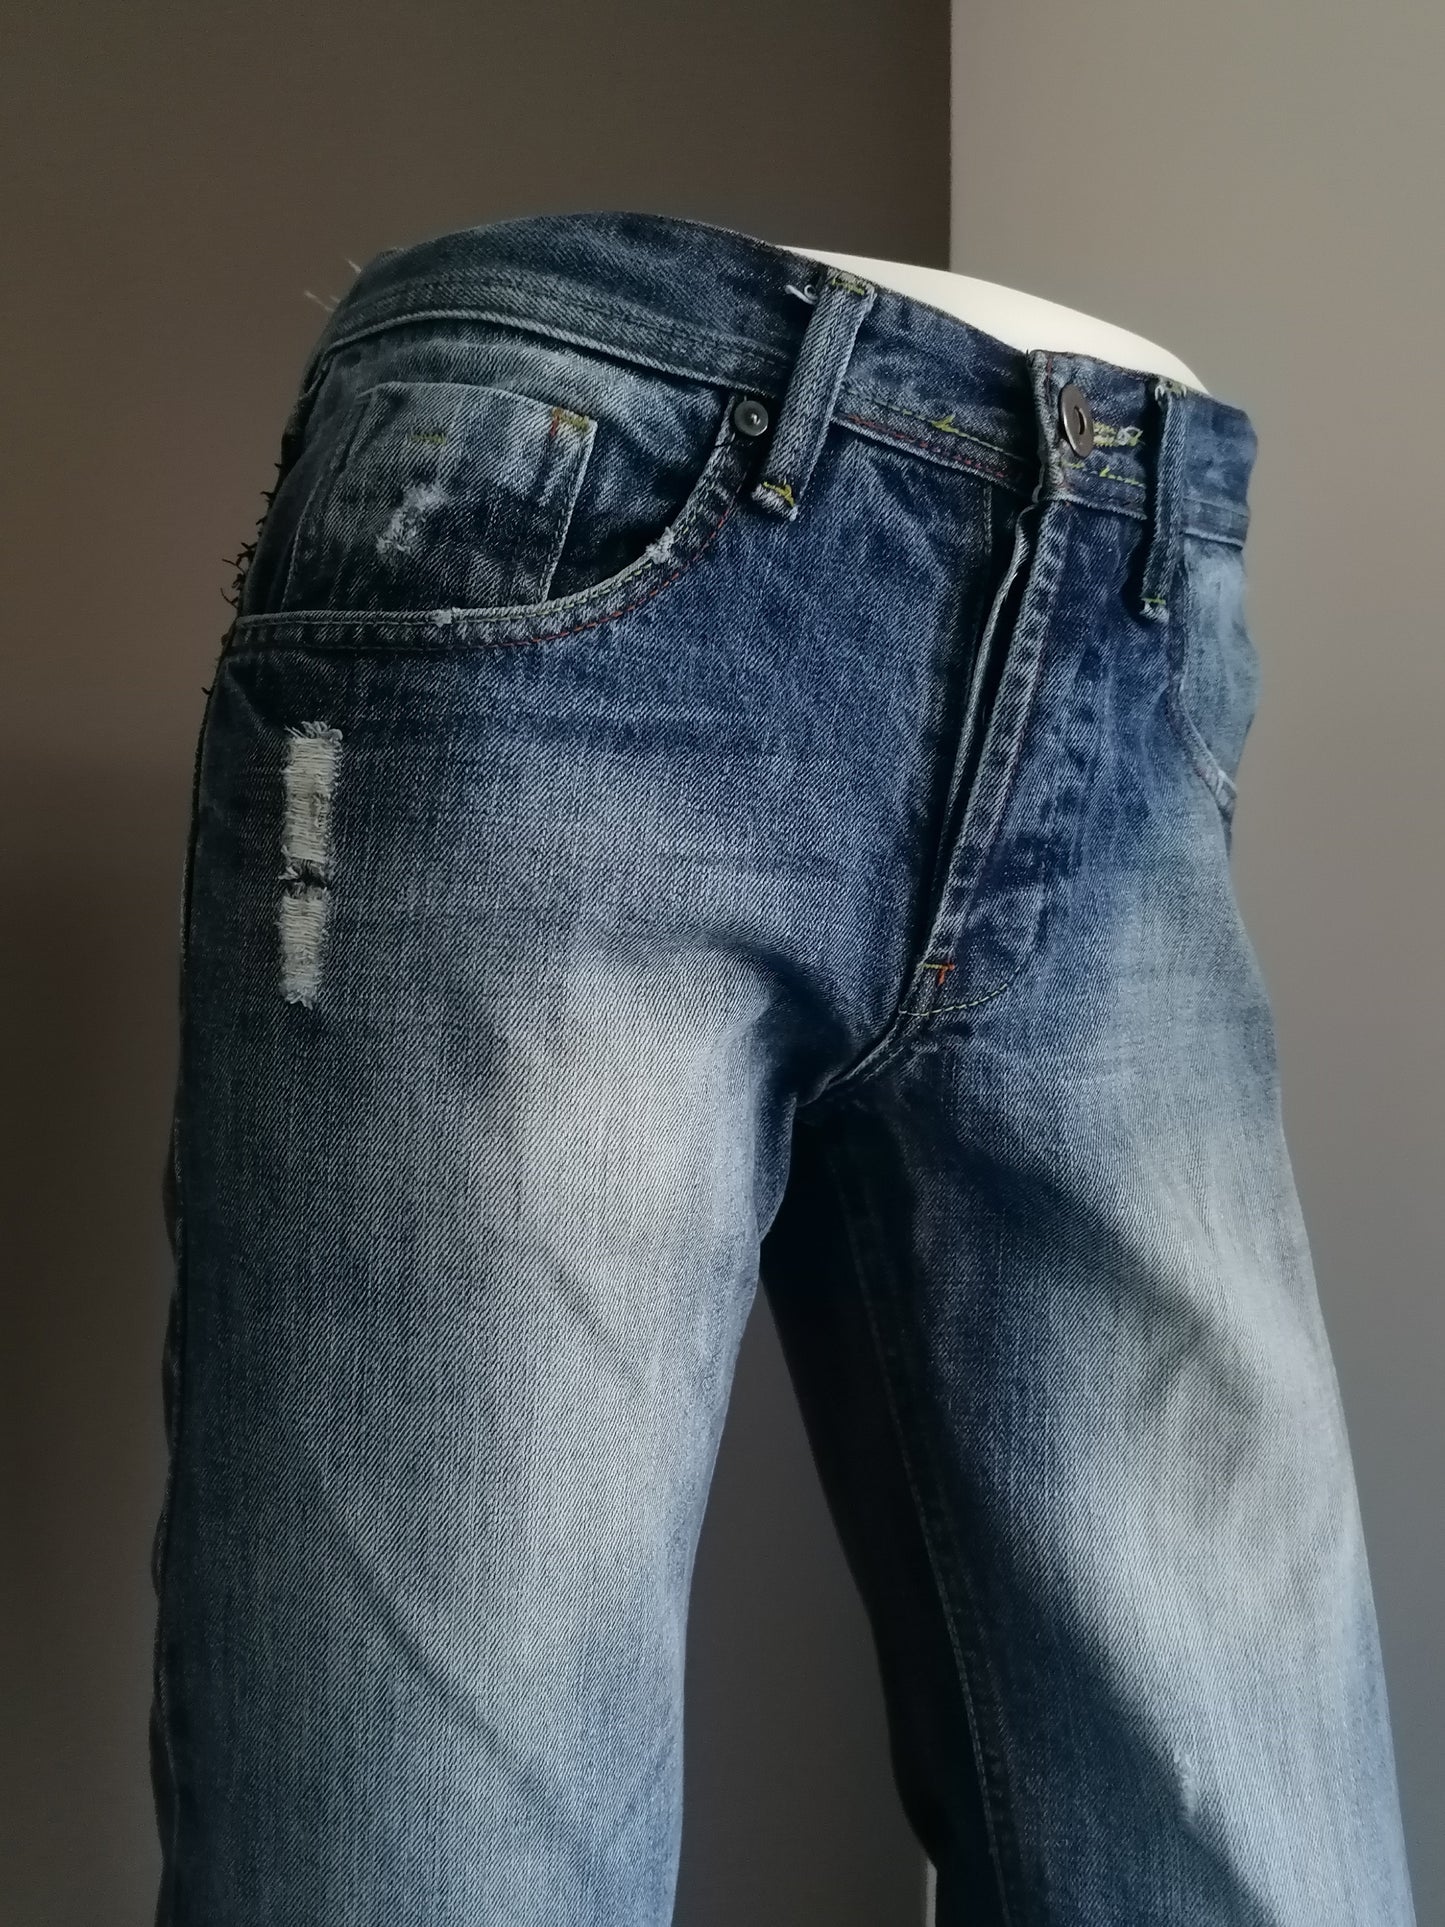 New look jeans. Blue colored. Size W30 - L30. Straight leg.